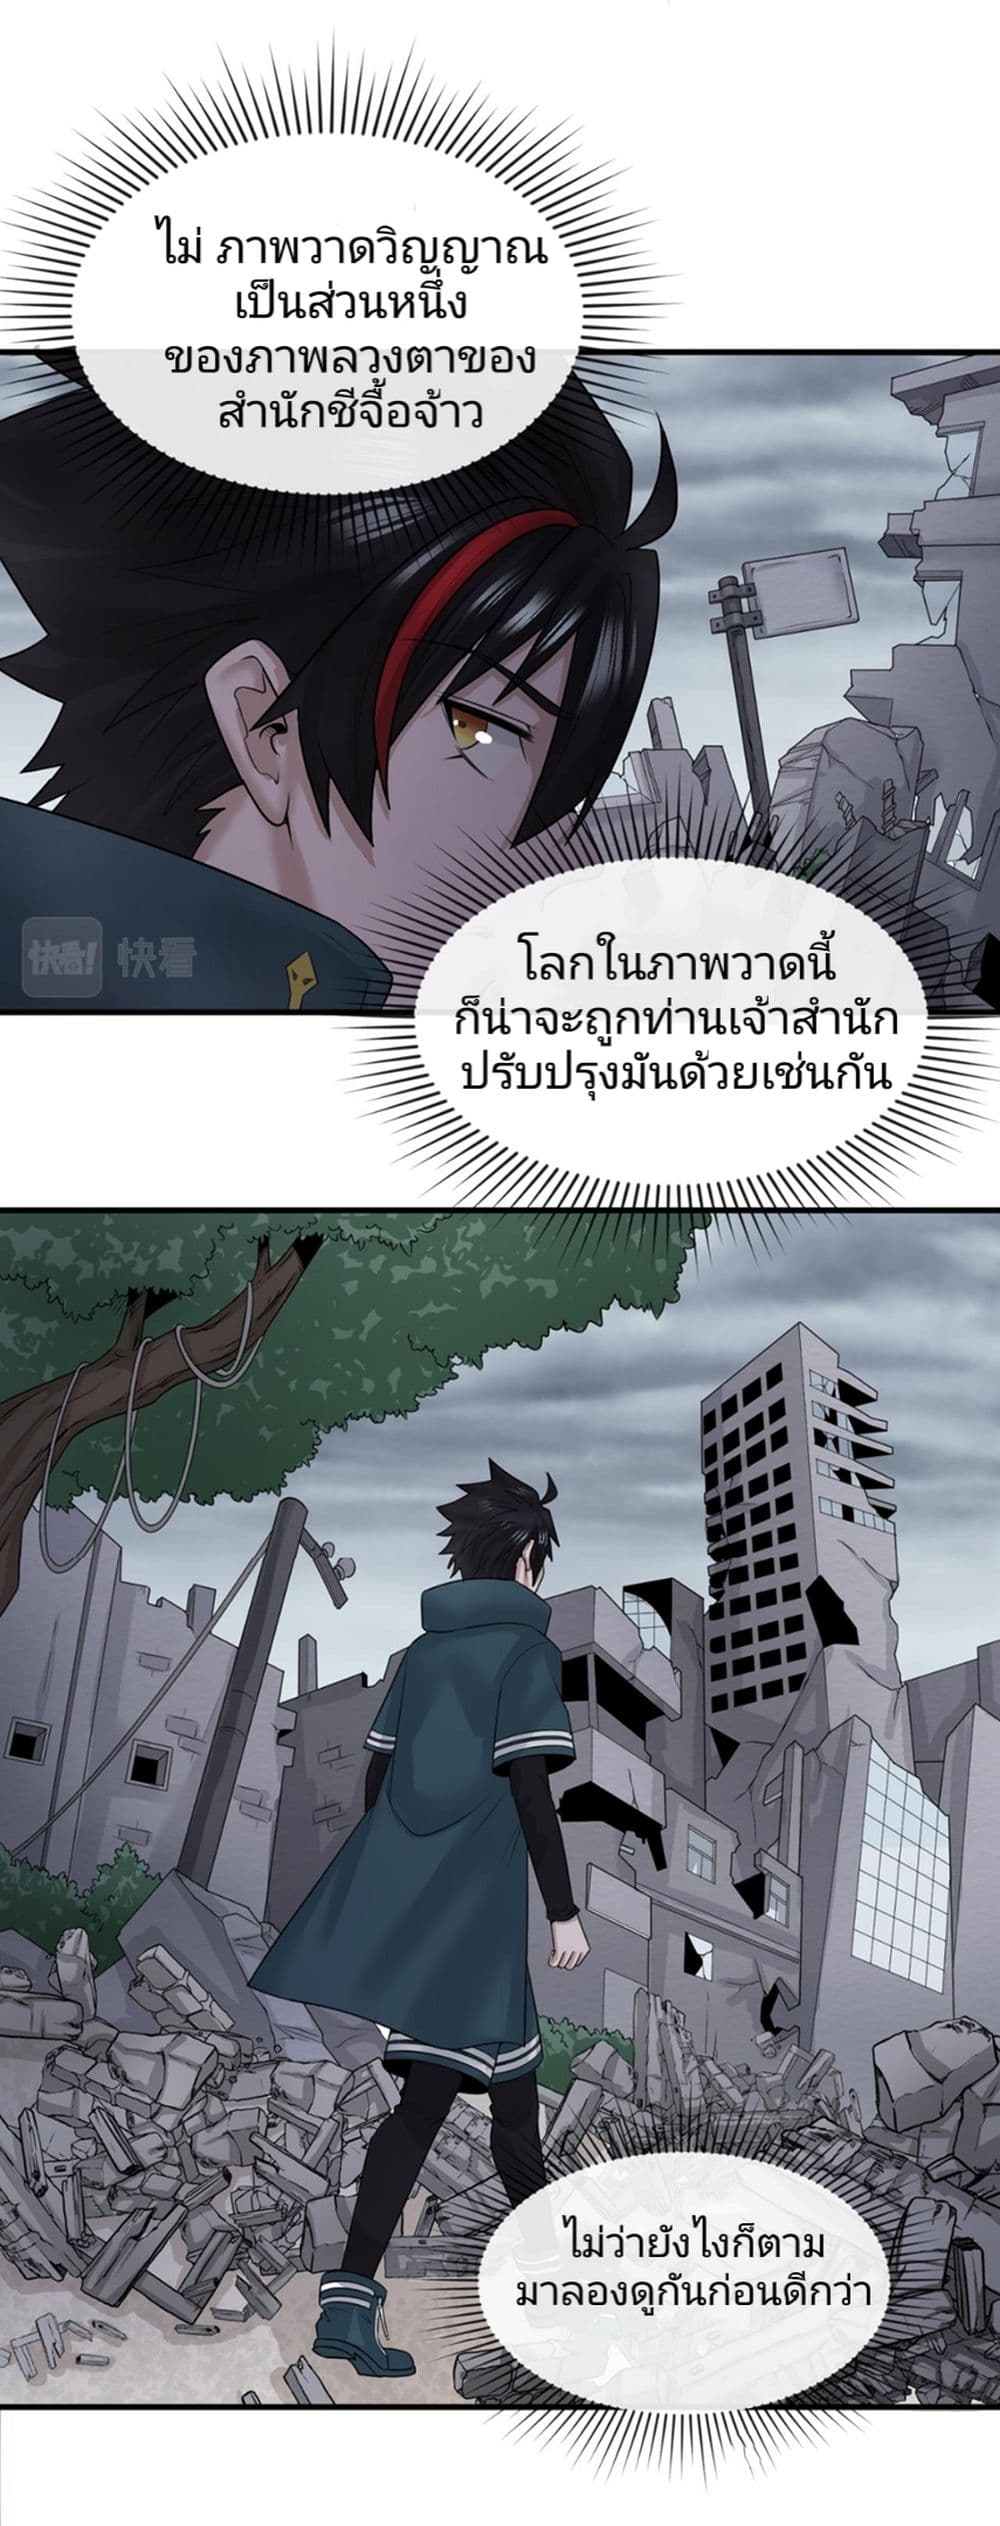 The Age of Ghost Spirits à¸à¸­à¸à¸à¸µà¹ 46 (23)